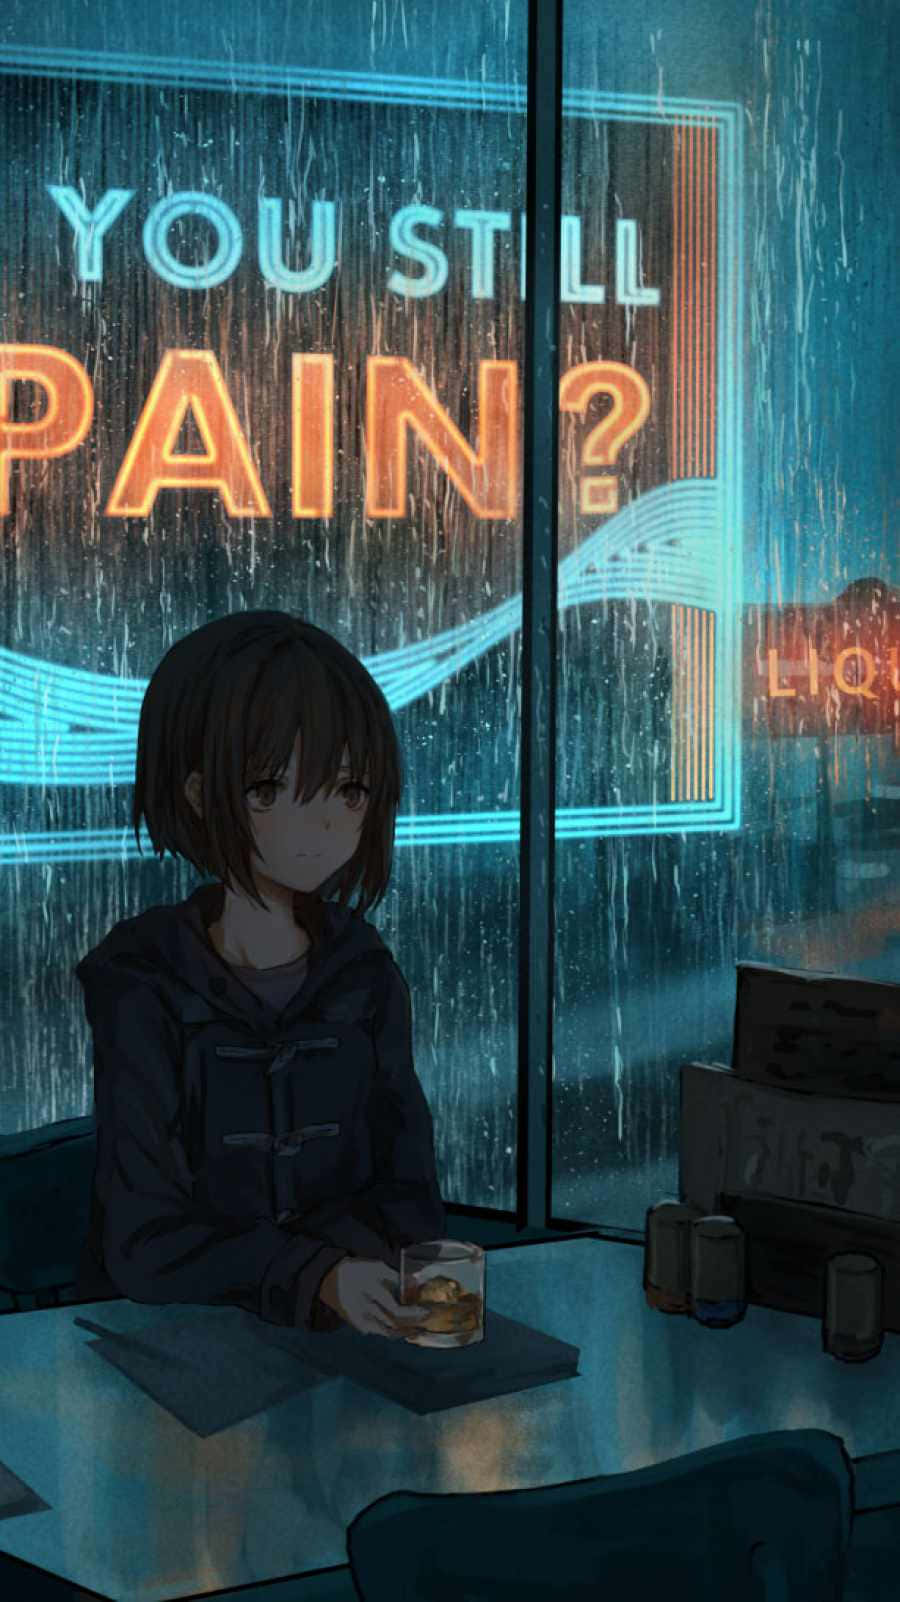 The pain of losing someone close Wallpaper